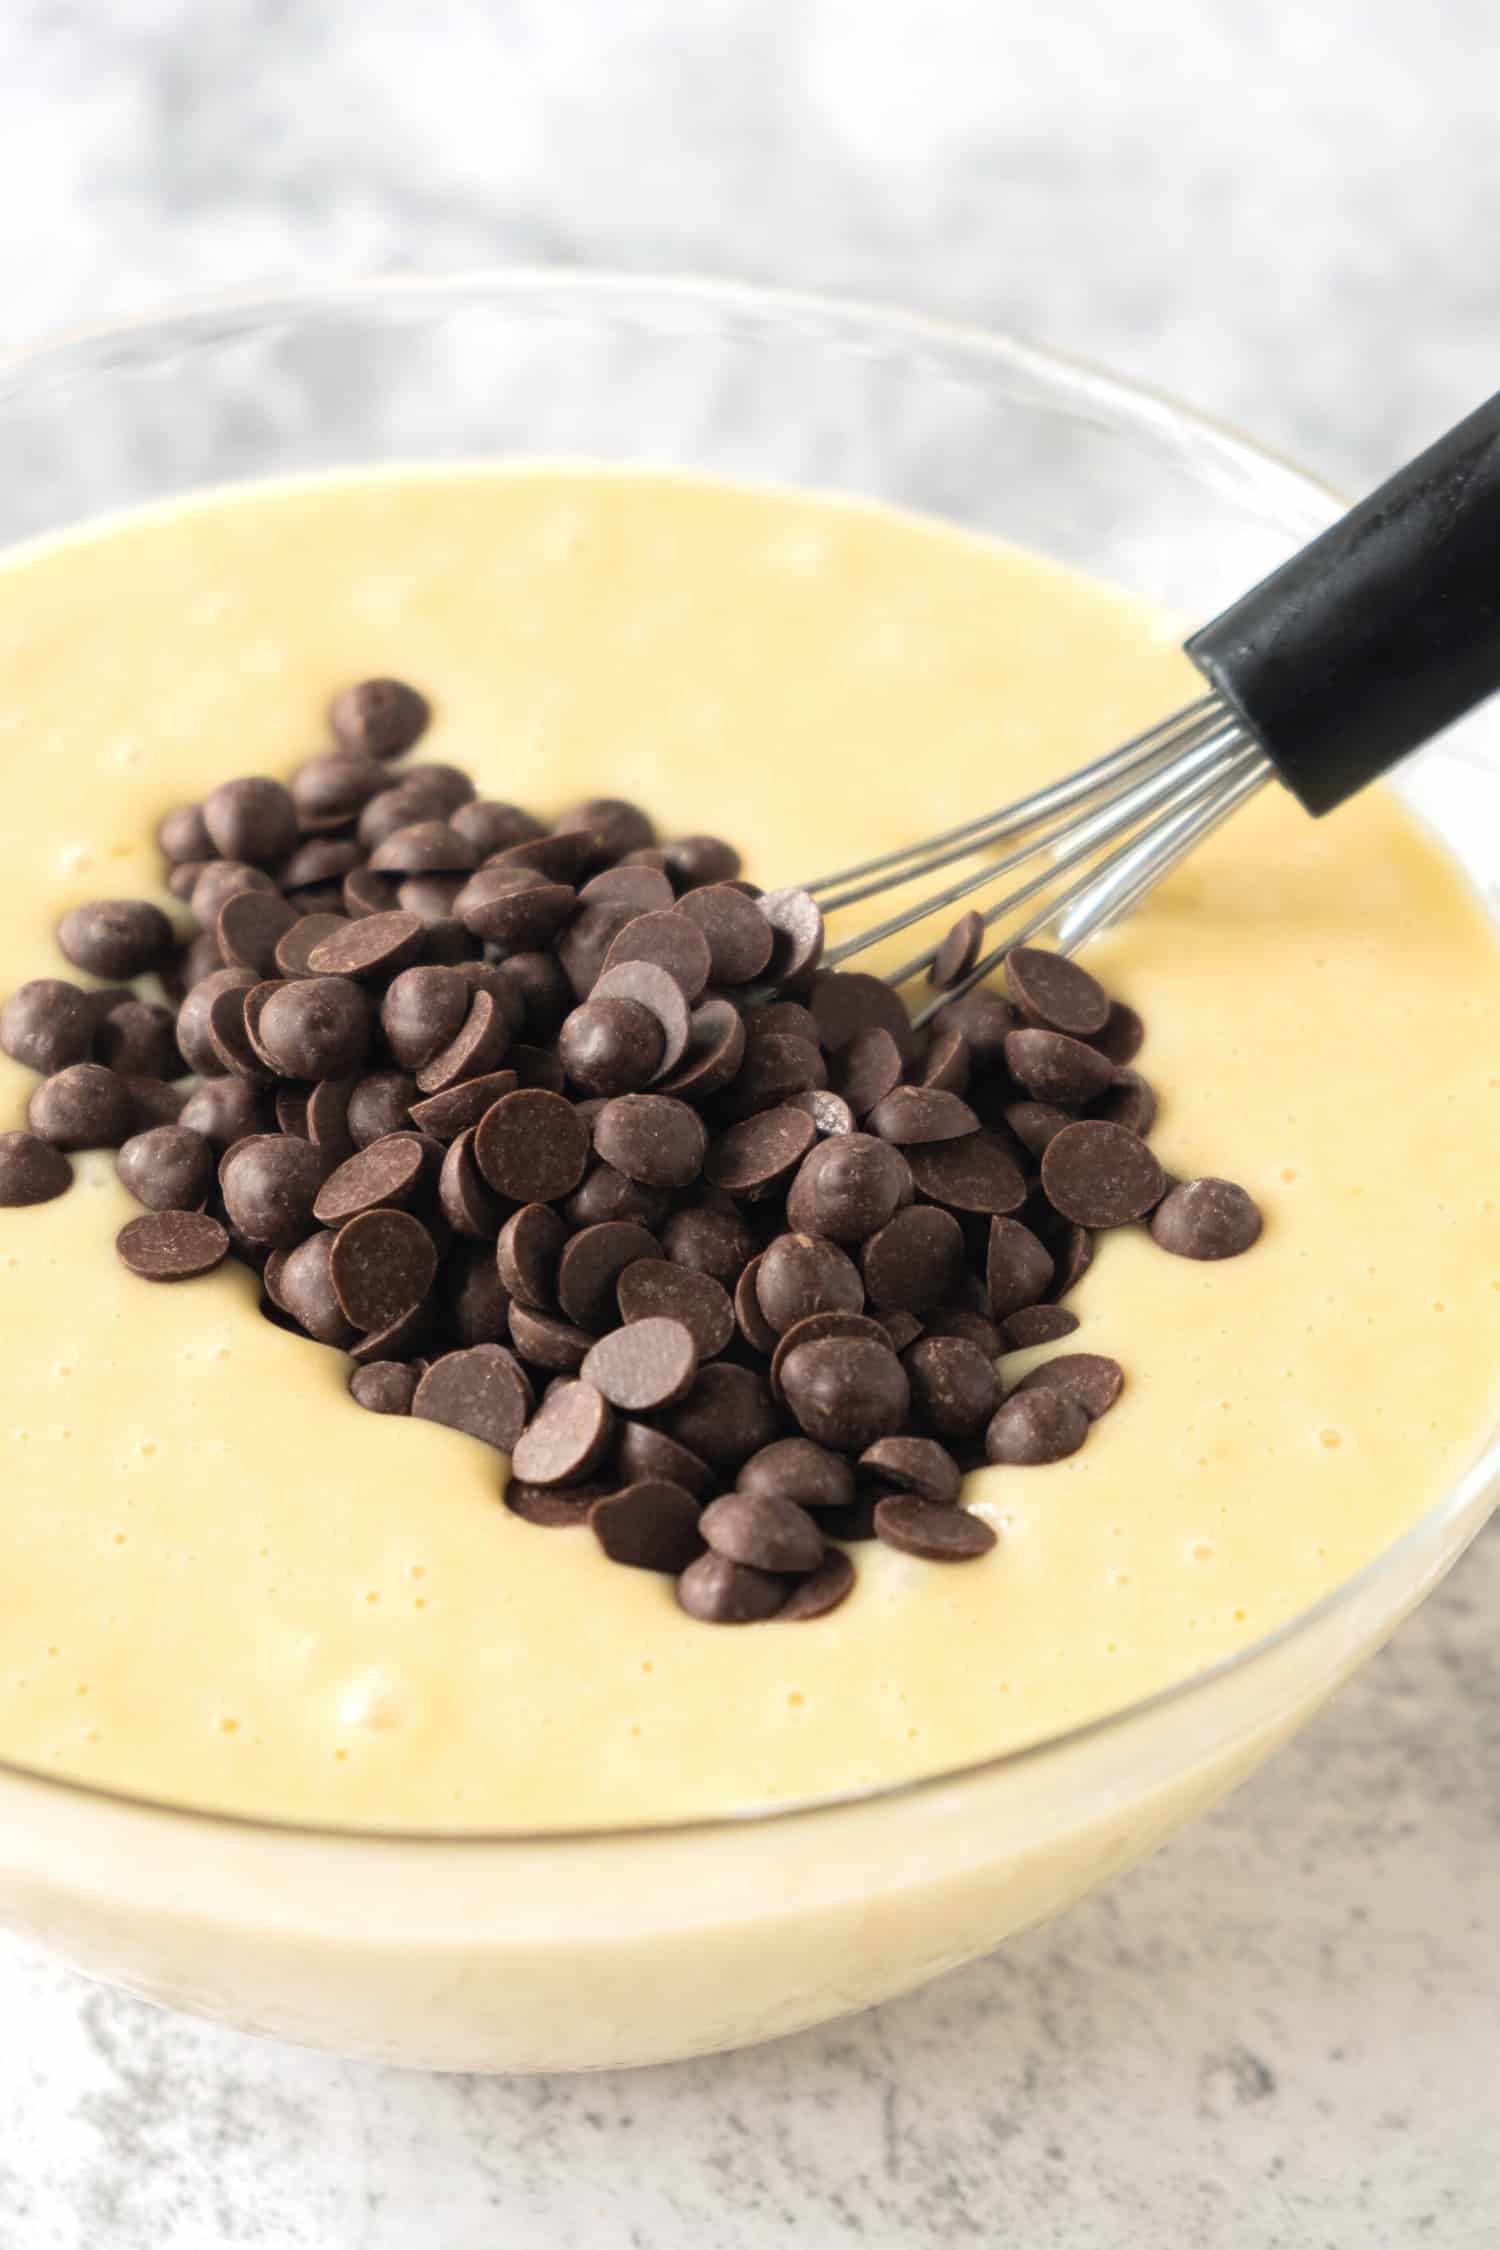 Chocolate chips on top of a bowl of muffin batter.